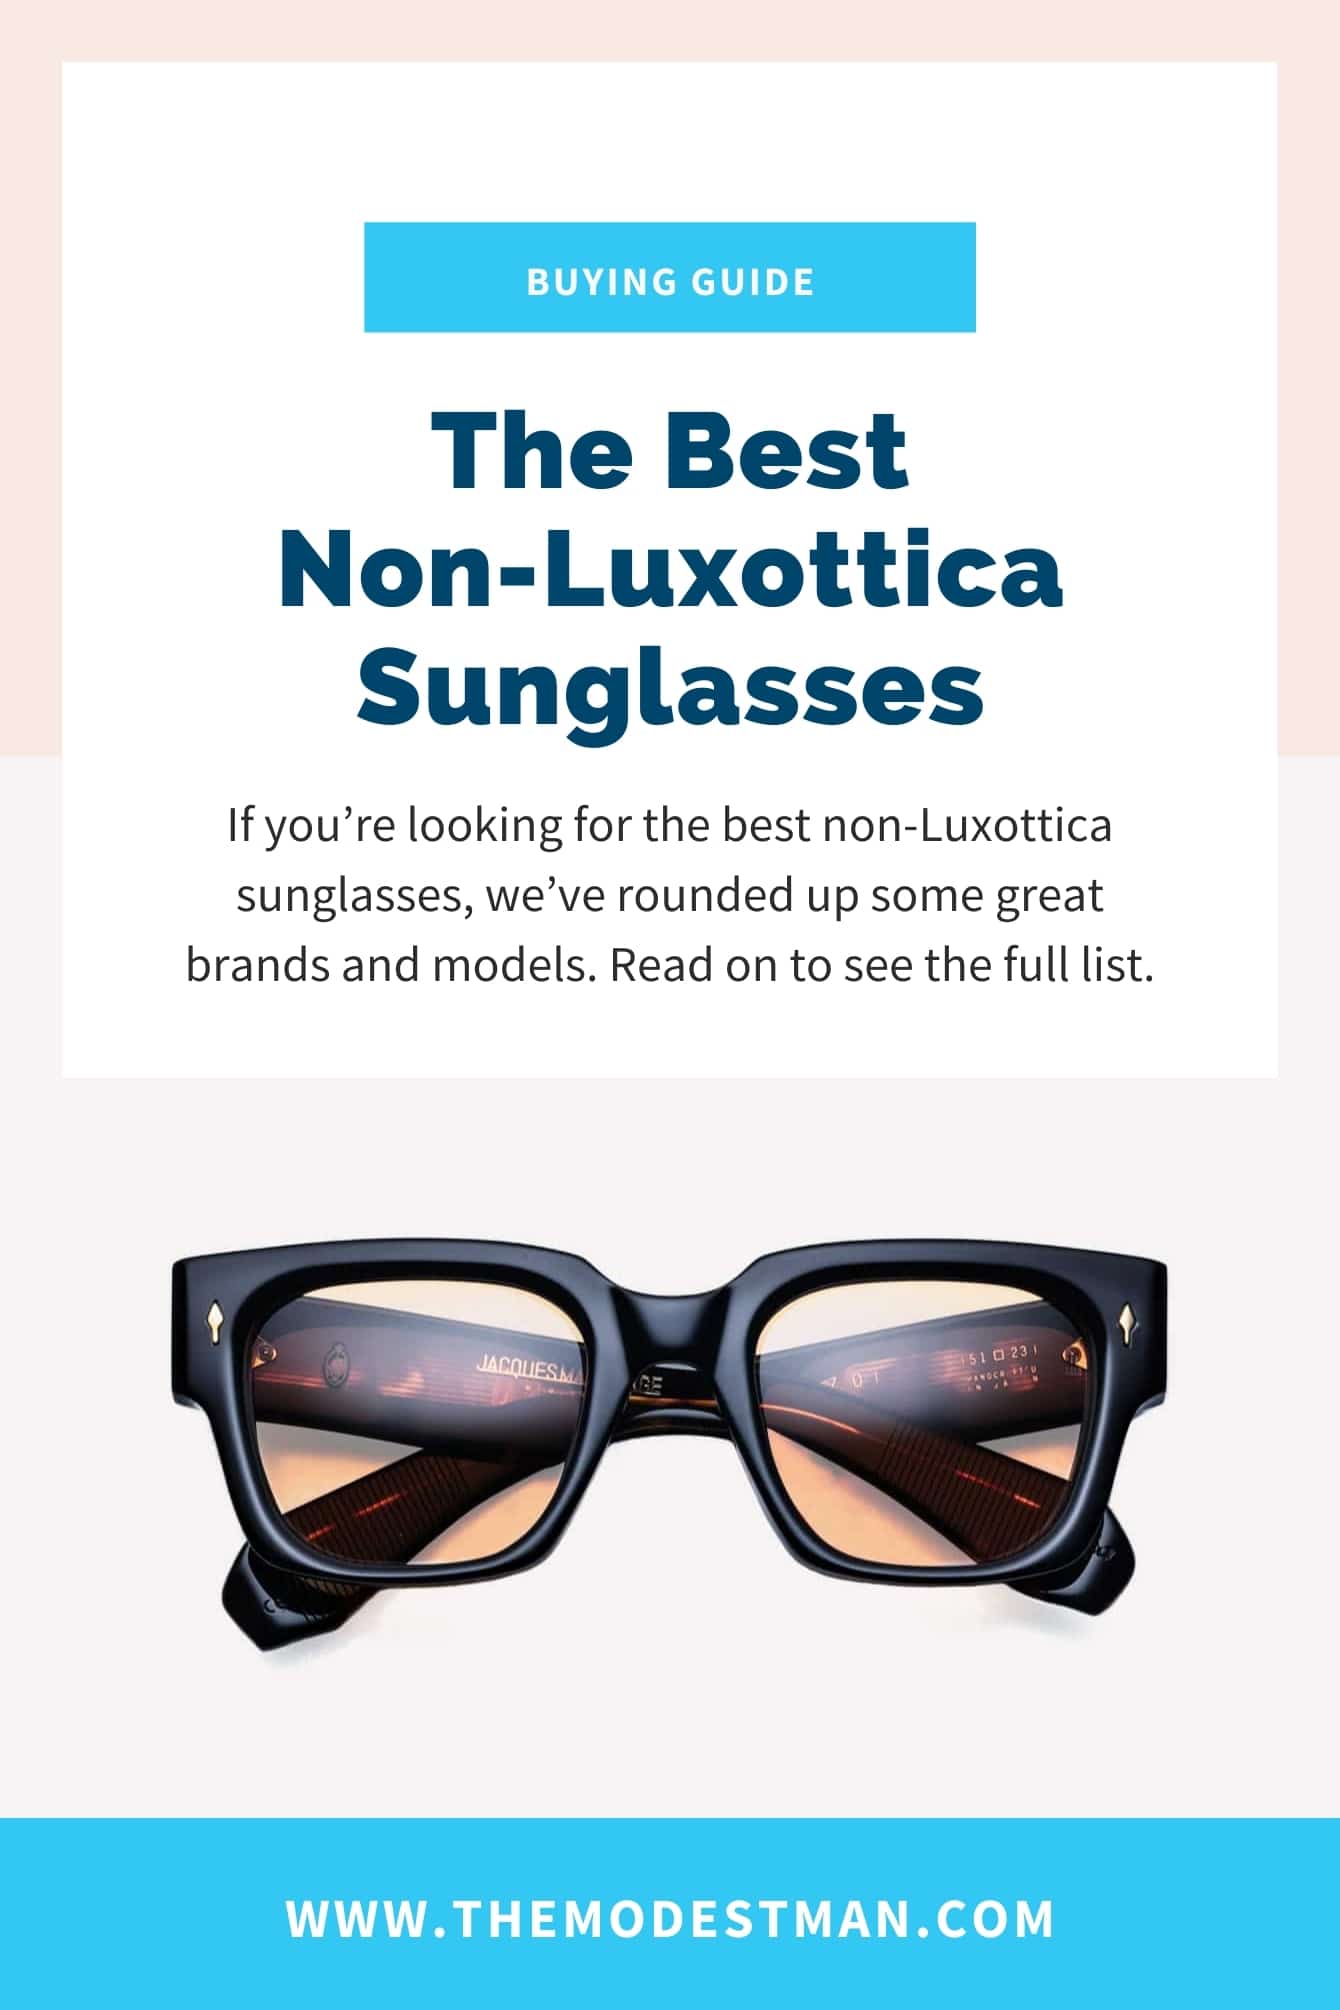 THE ULTIMATE SUNGLASSES GUIDE!  Lit af styles launched SHOP